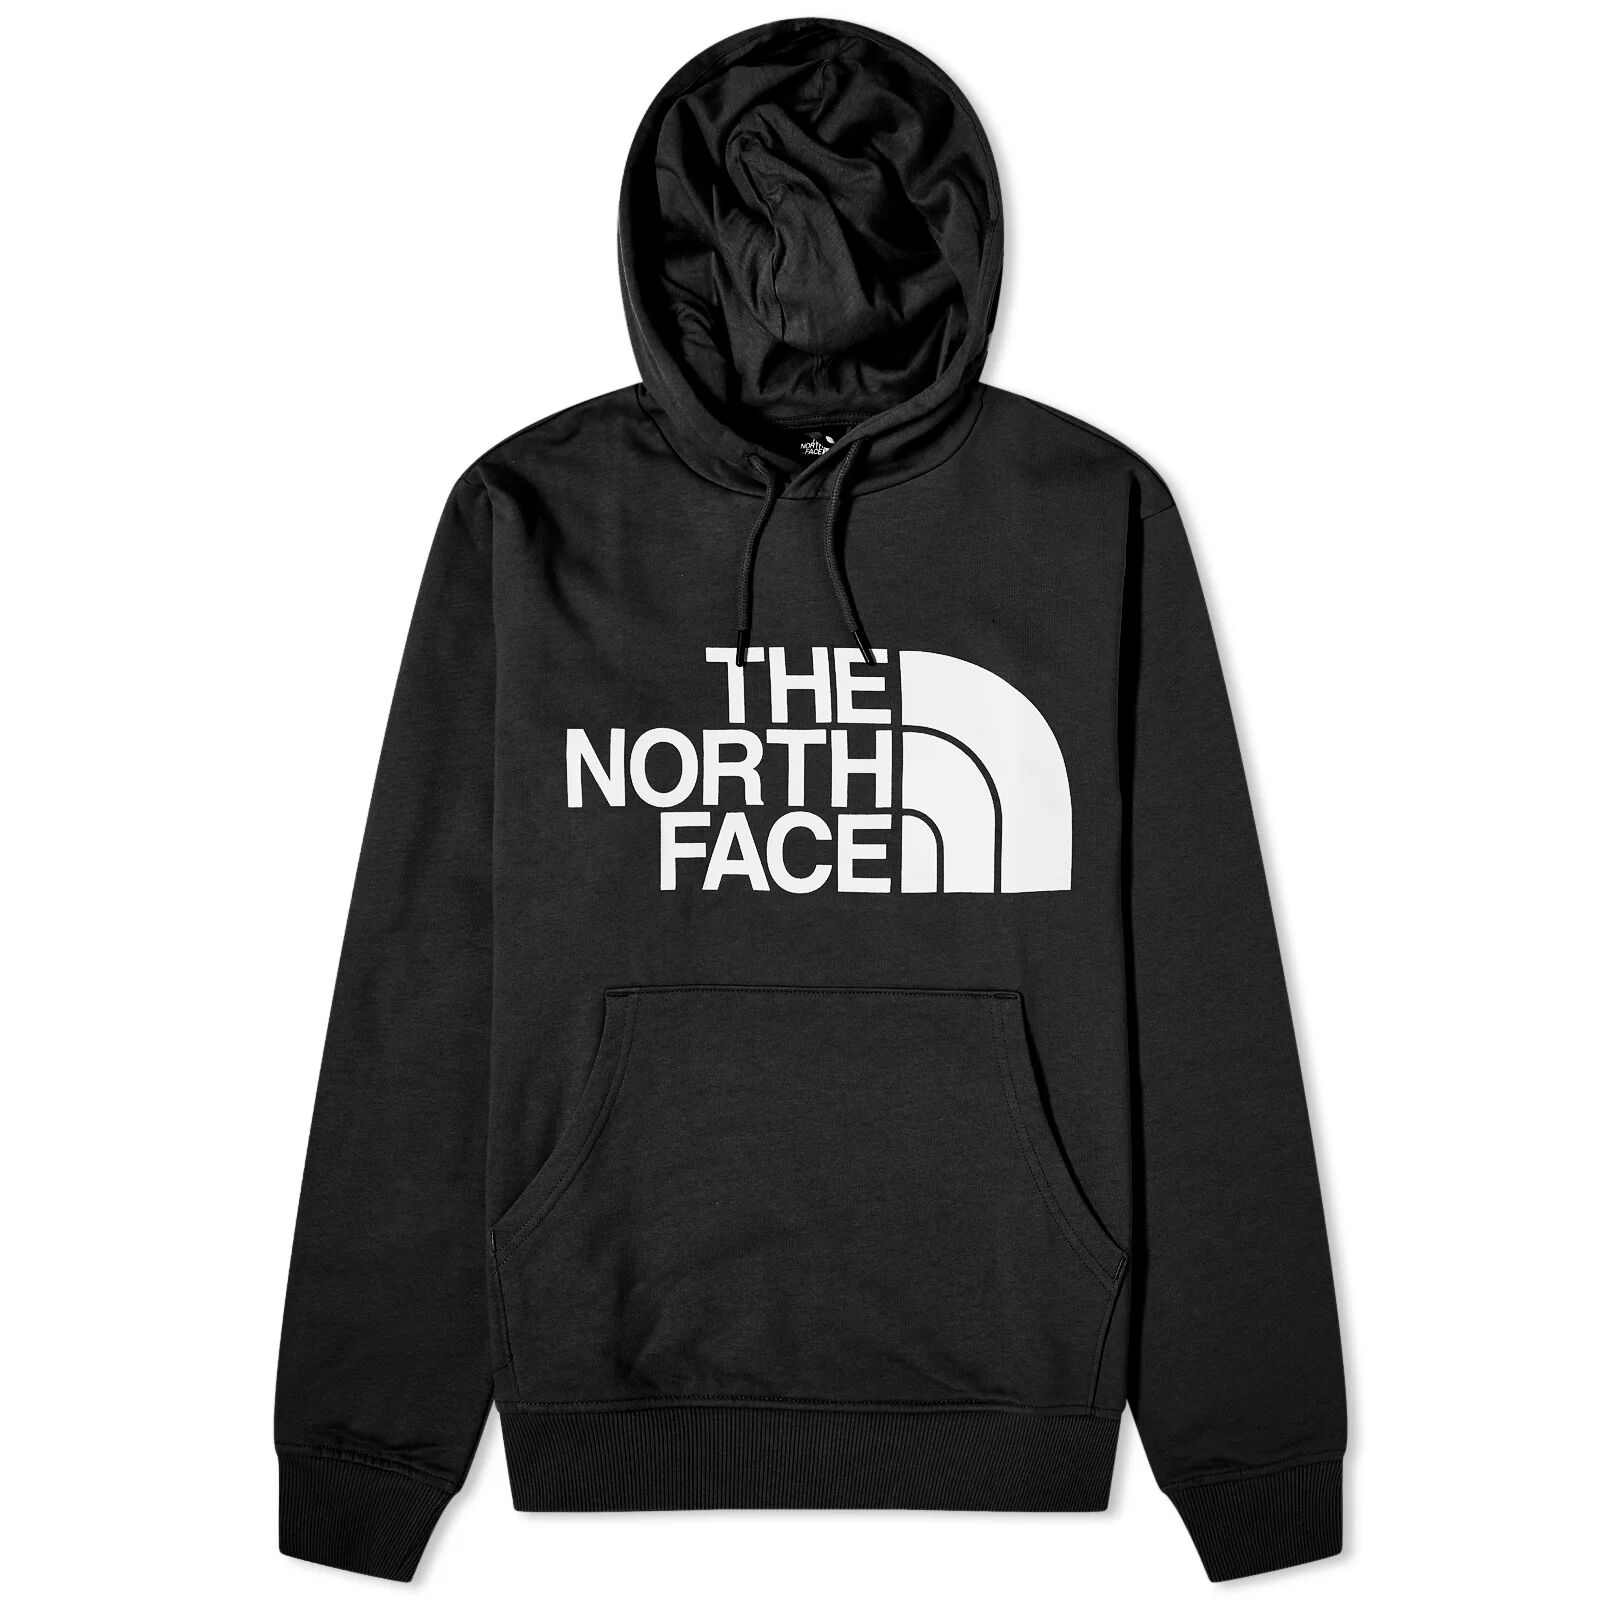 The North Face Men's Standard Popover Hoodie in Black, Size Large